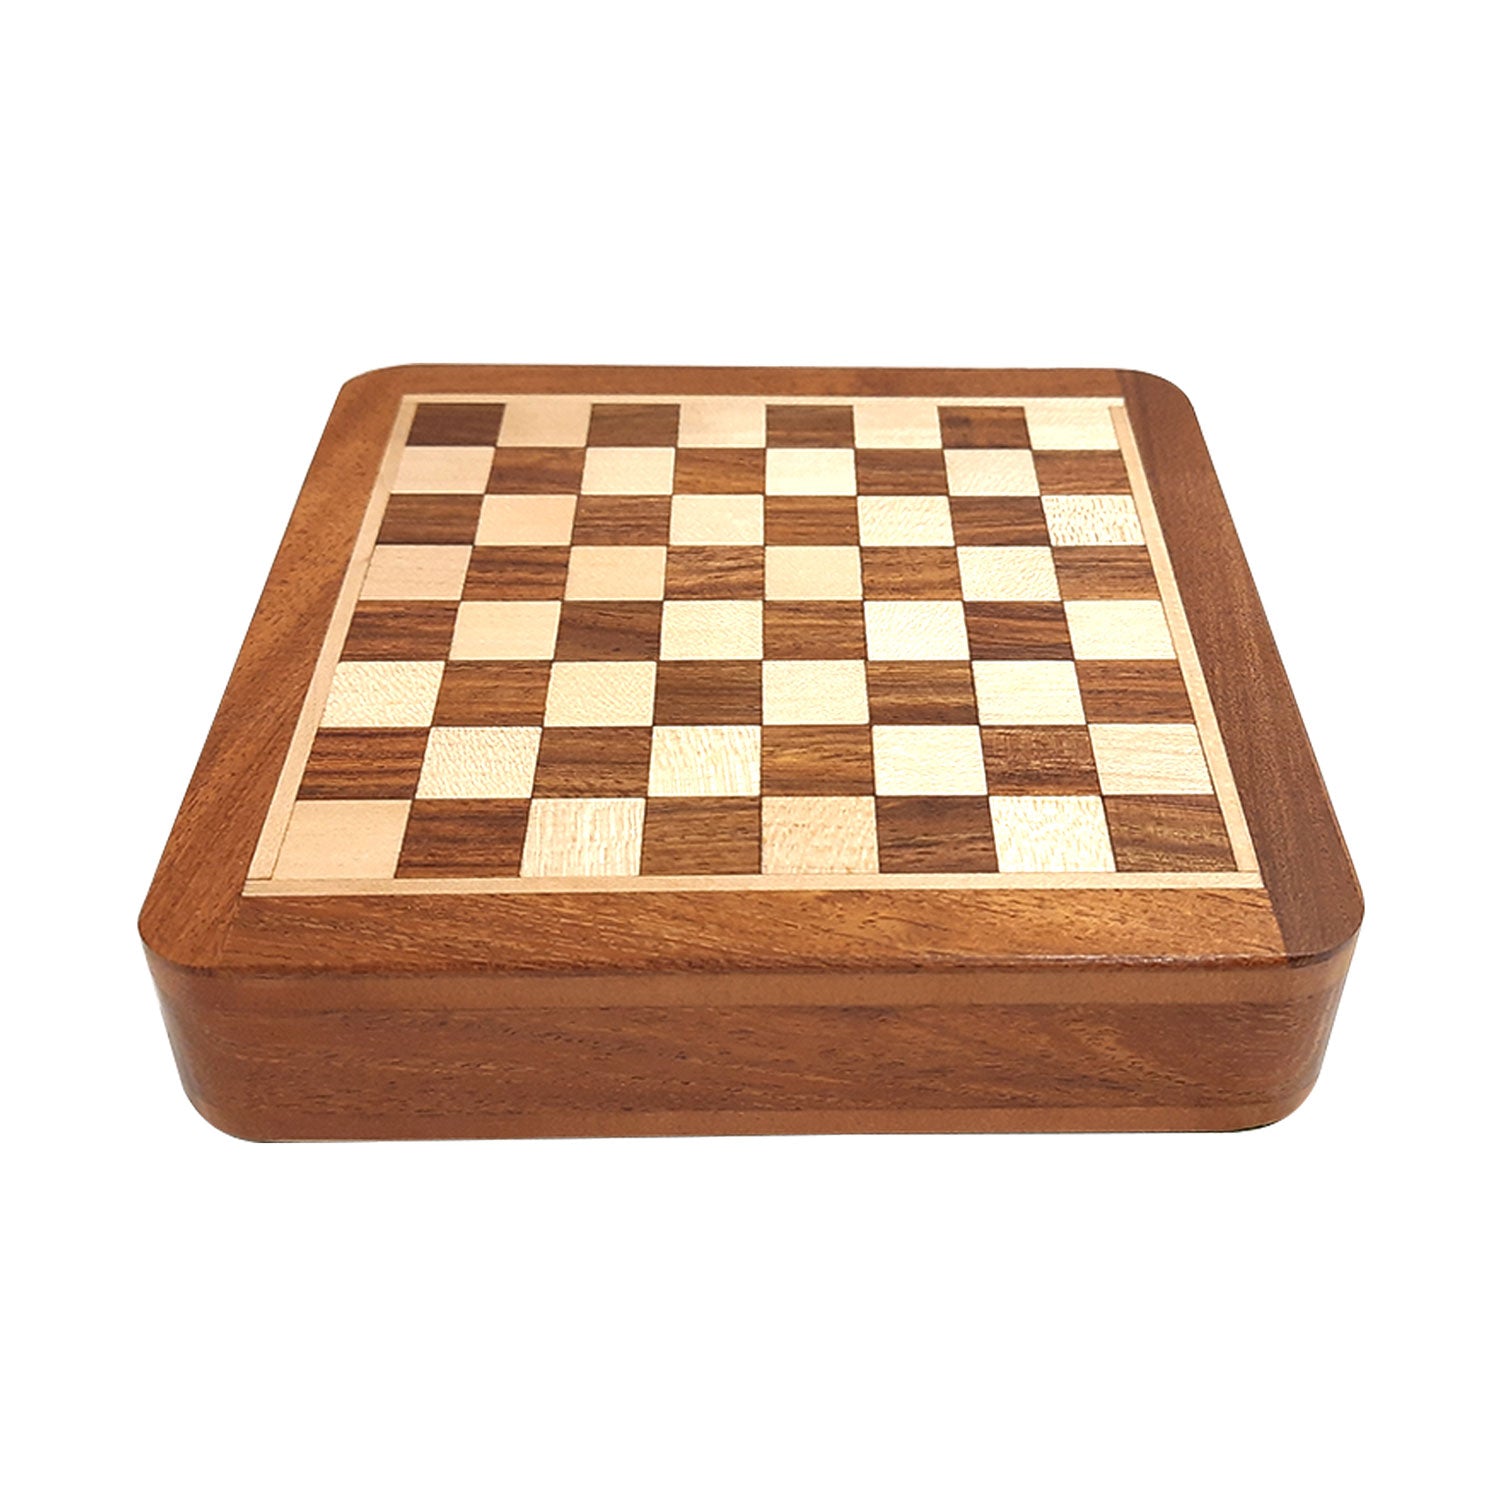 The Bombay Store Chess Set with Brass Coins